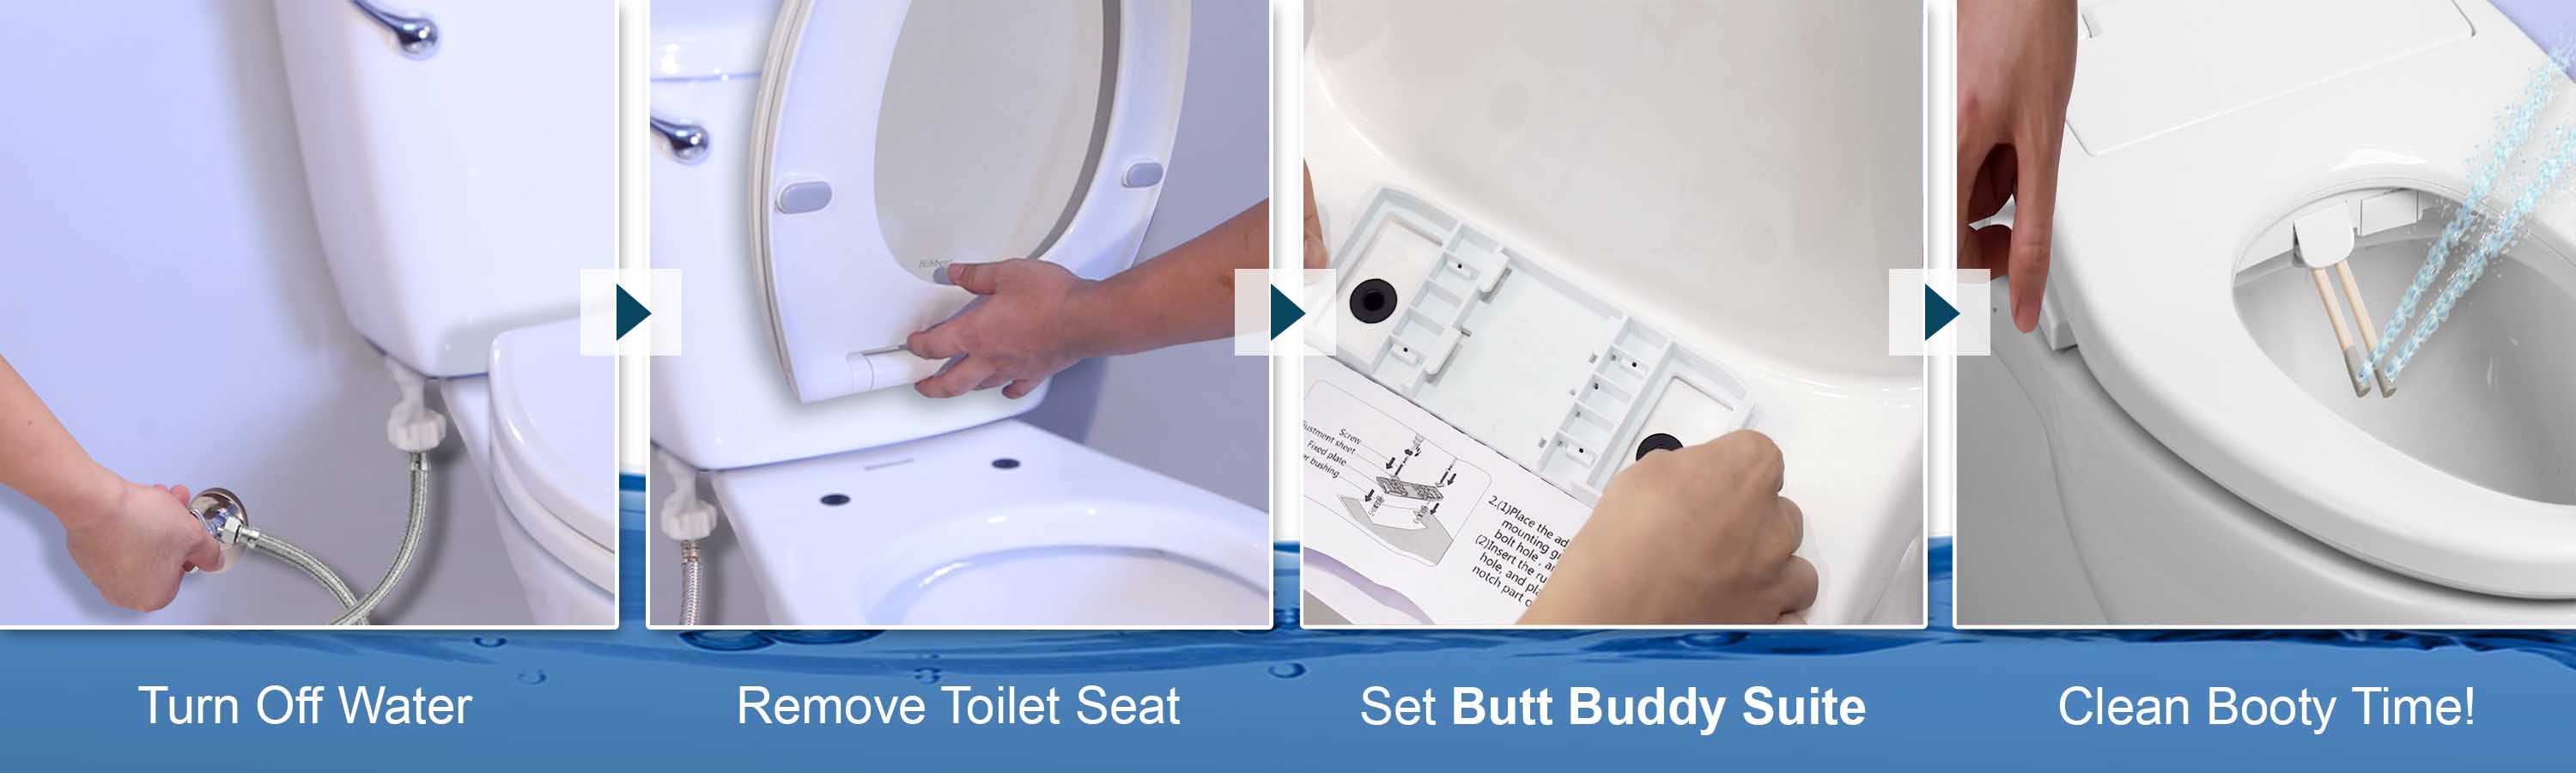 In My Bathroom (IMB) | Butt Buddy - Bidet Toilet Attachment - Fresh Water Sprayer - Easy to Install - Simple to Use - Turn Off Water - Remove Toilet Seat - Connect Bidet - Clean Booty Time - Product Banner - BBB